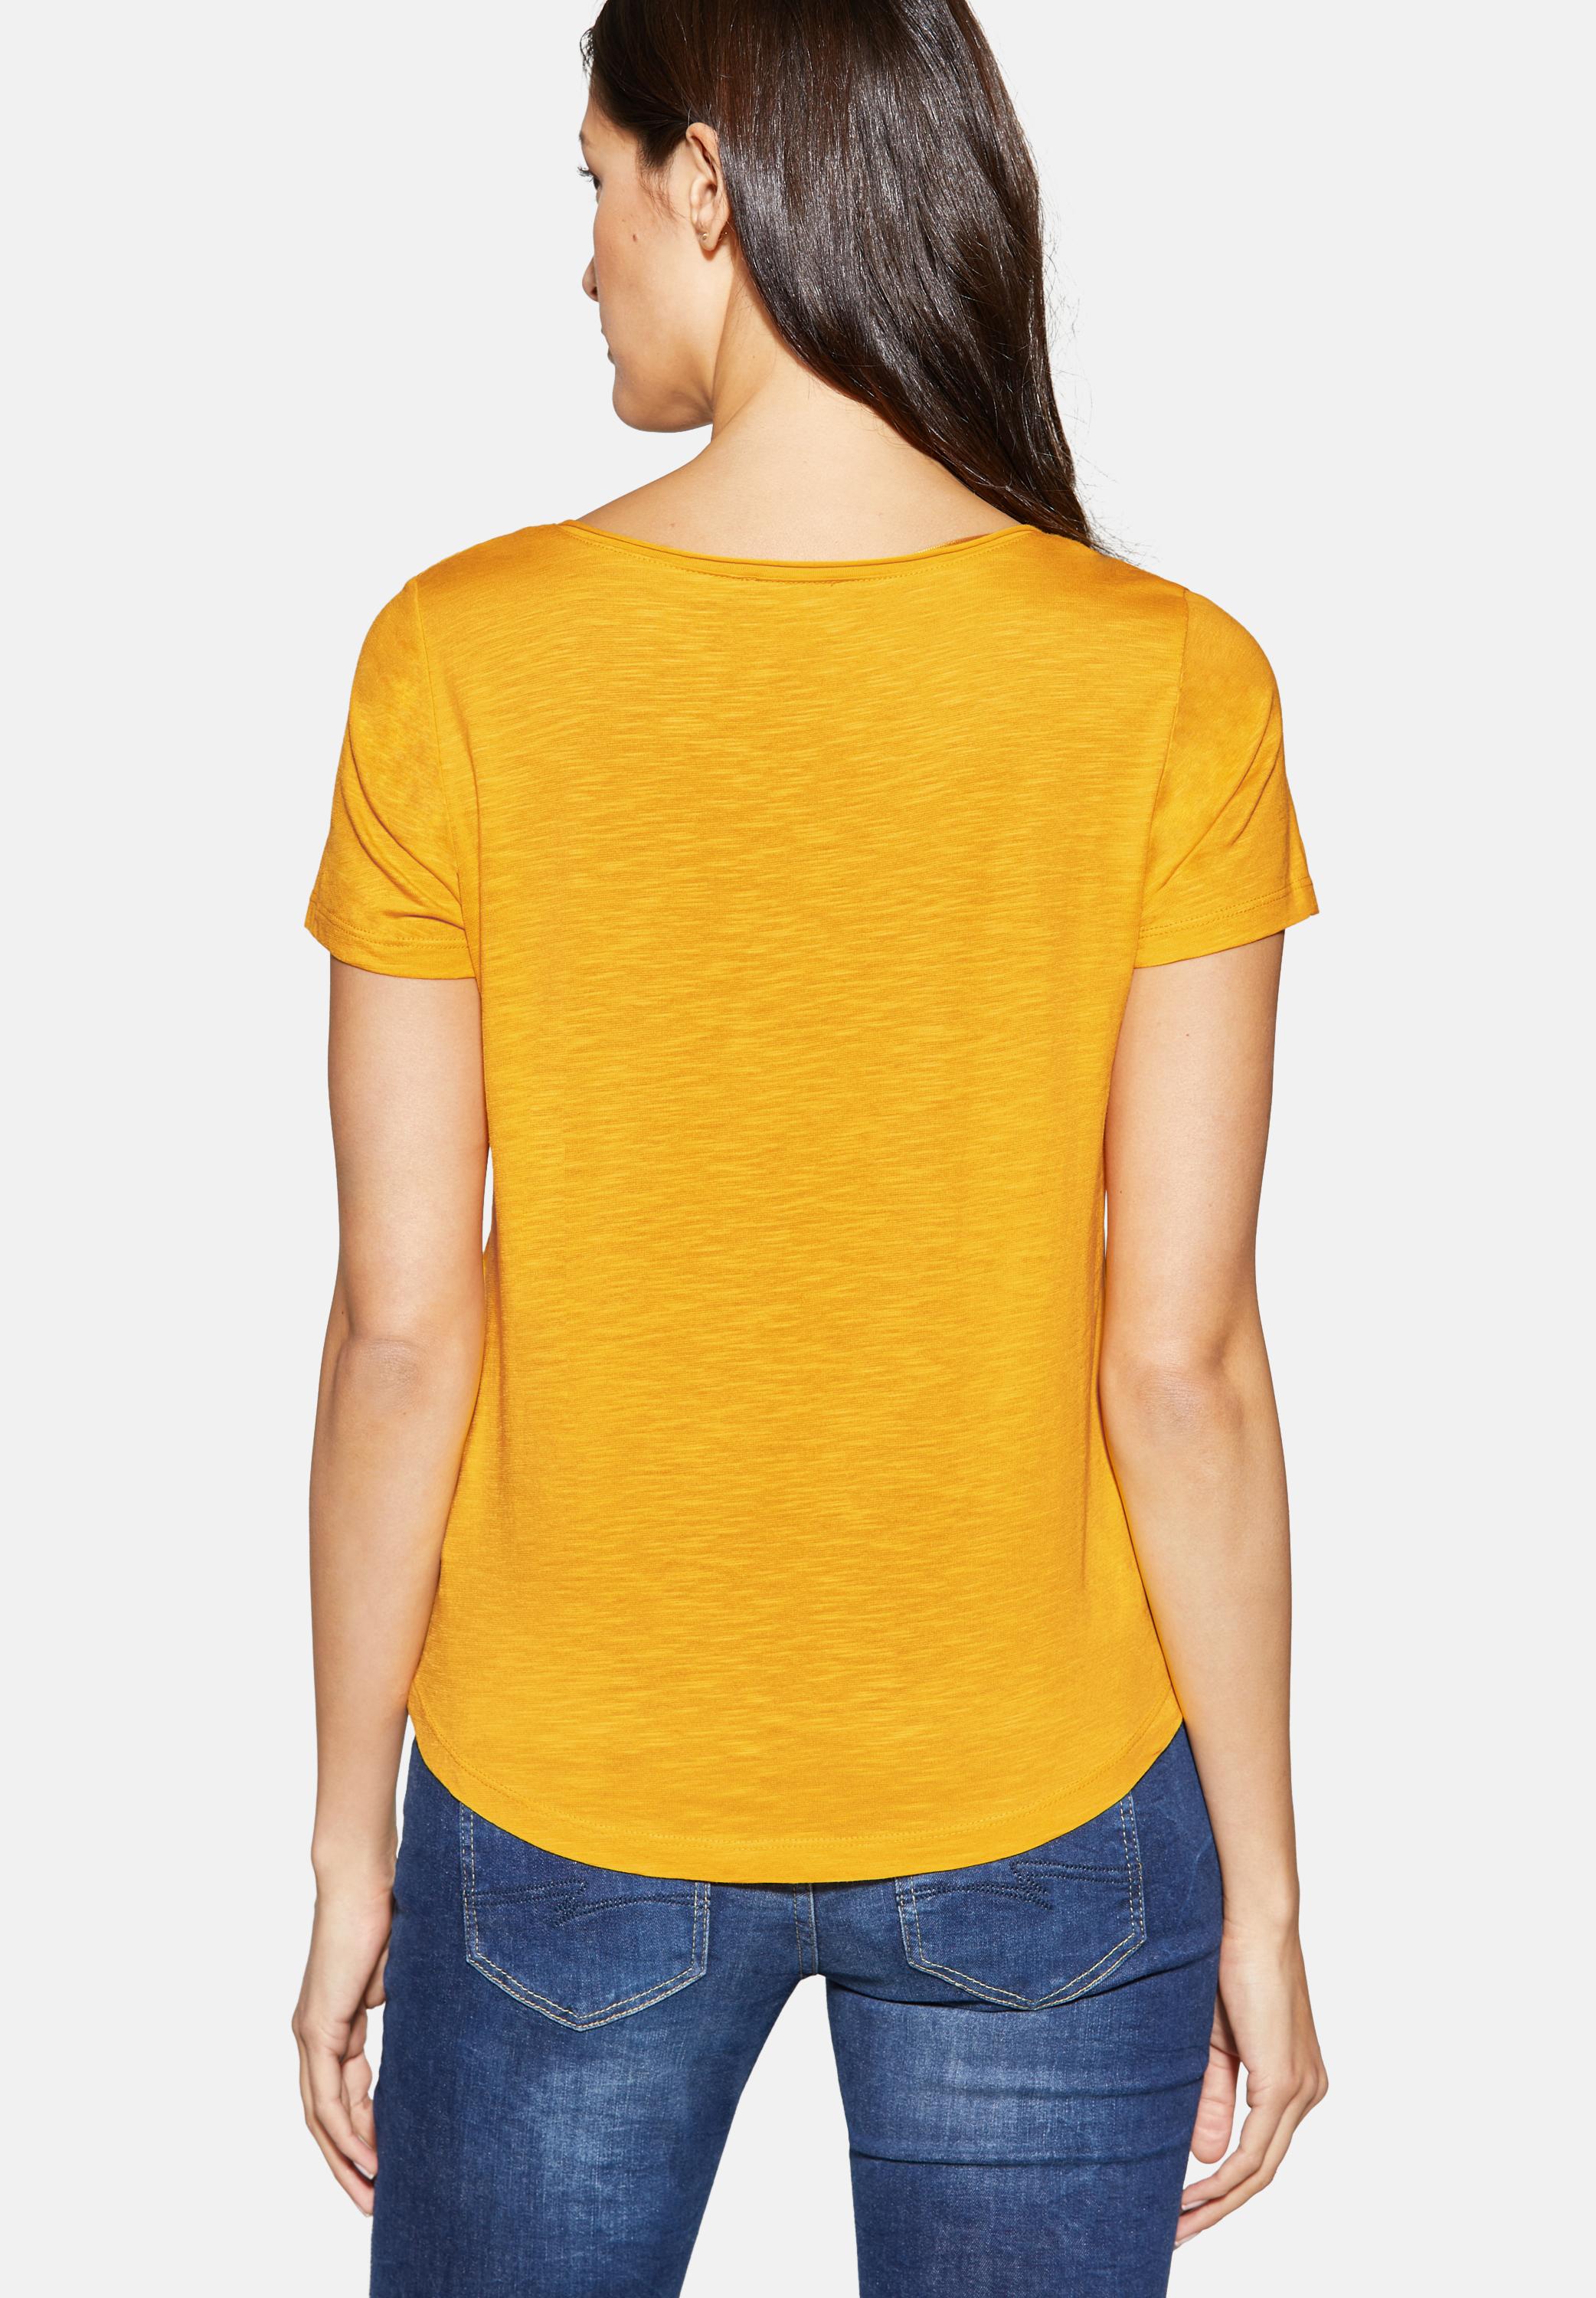 Gerda Street Mode in Clementine One T-Shirt CONCEPT A313386-11804 Bright -